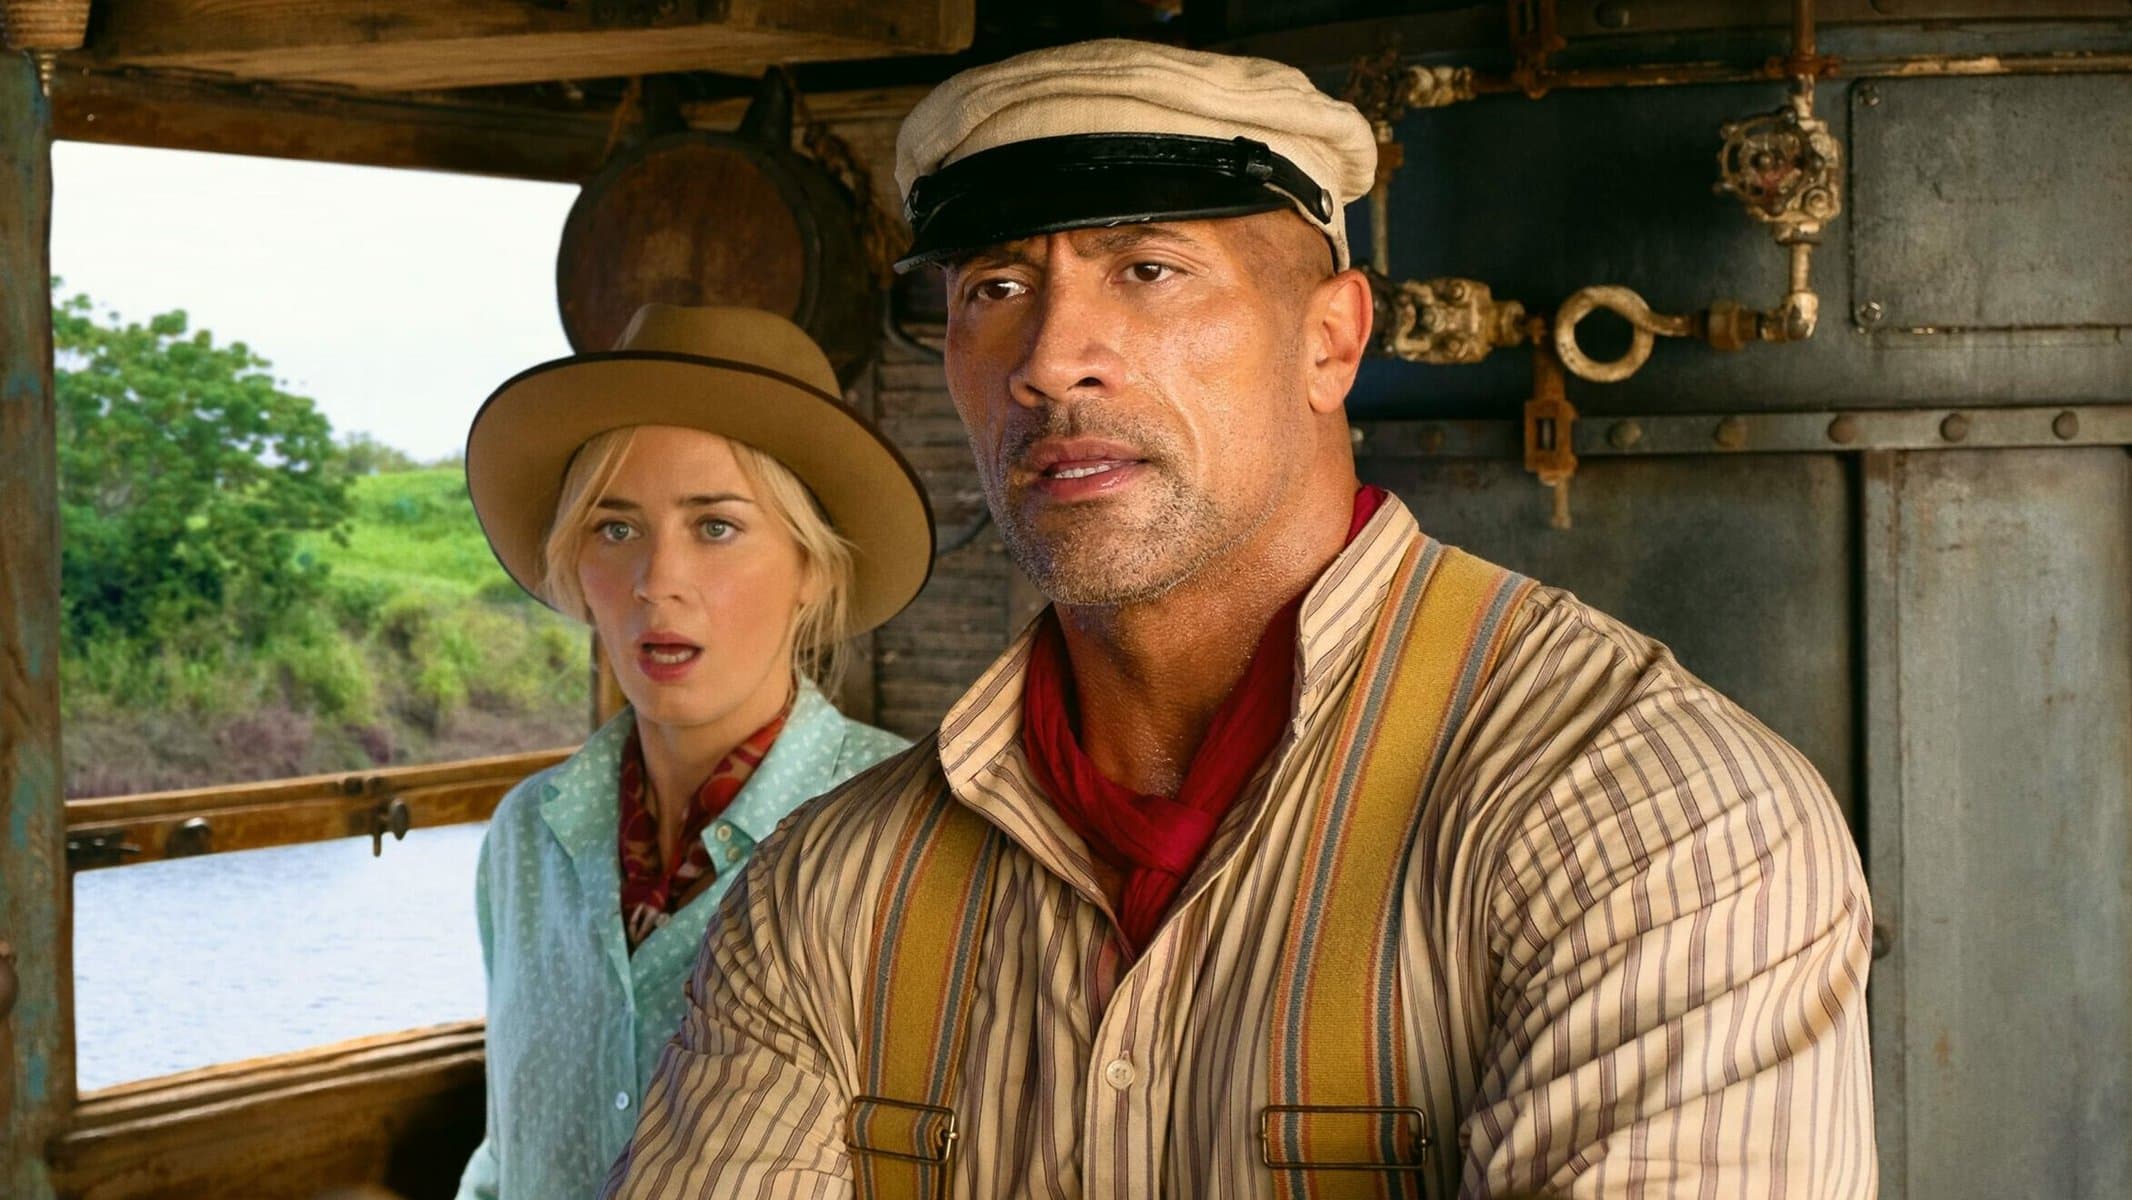 Jungle Cruise 2 is a go - with Emily Blunt and Dwayne Johnson both returnin...